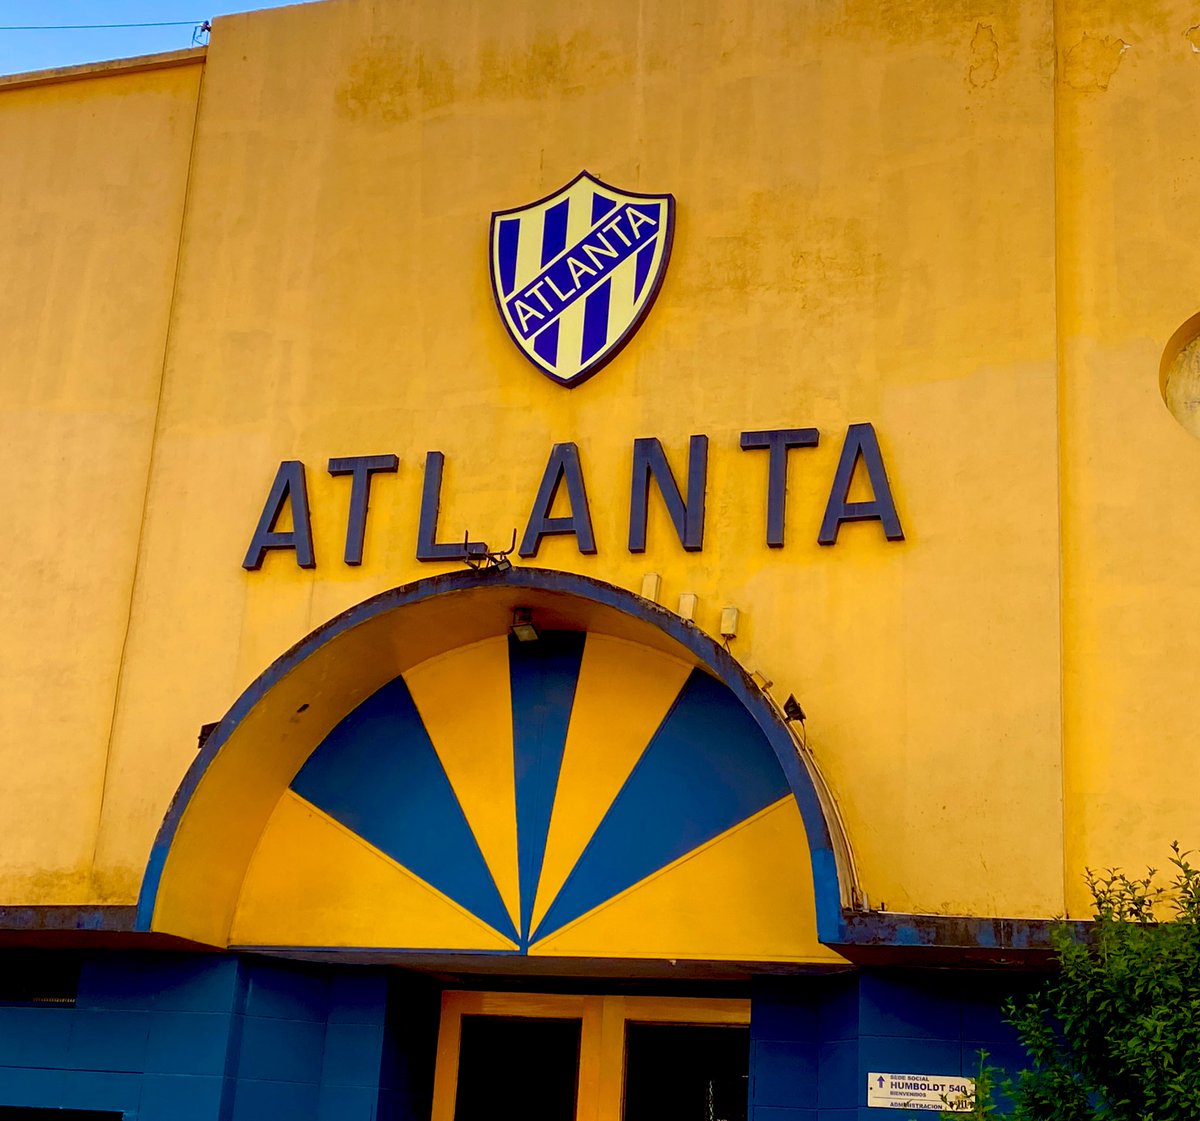 #6 Atlanta. A lower league club down here but they play in great colours and I have an Atlanta shirt in my bar at home   #lufc